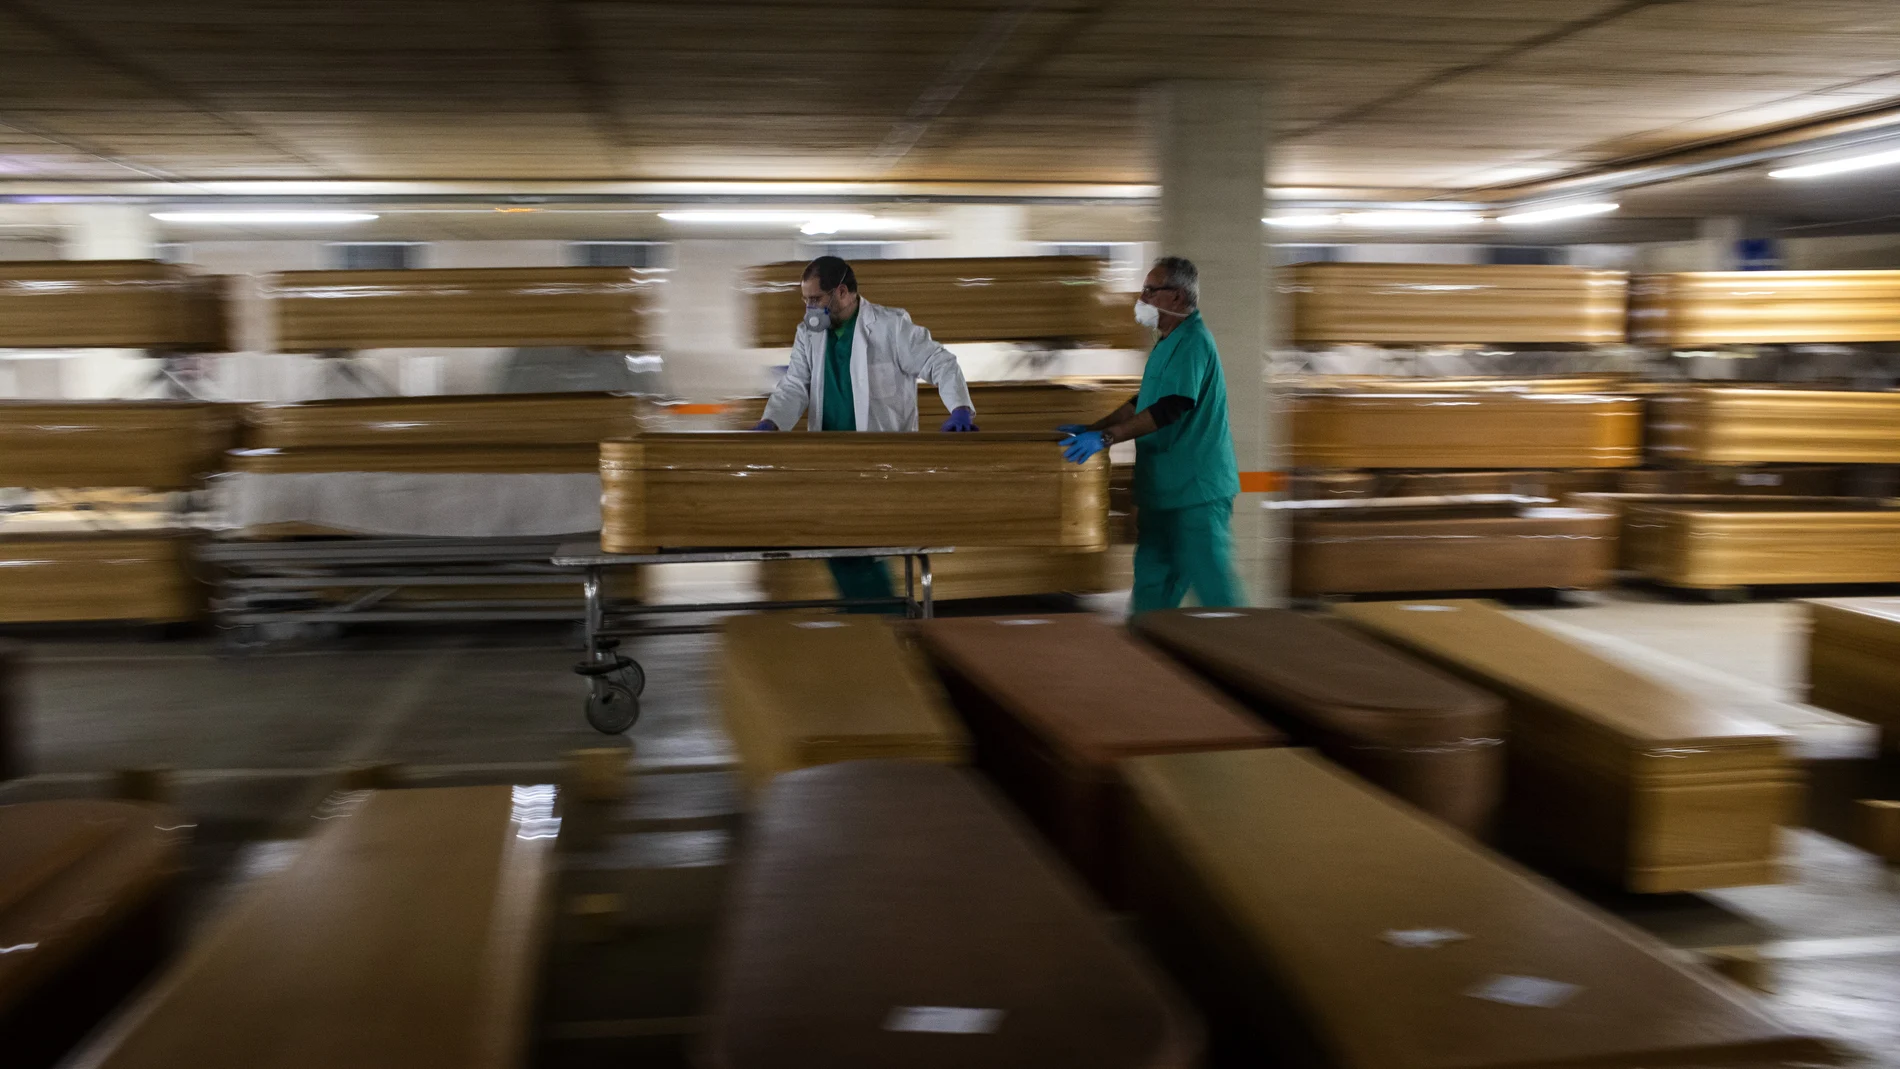 Workers move a coffin with the body of a victim of coronavirus as others coffins are stored waiting burial or cremation at the Collserola morgue in Barcelona, Spain, Thursday, April 2, 2020. The new coronavirus causes mild or moderate symptoms for most people, but for some, especially older adults and people with existing health problems, it can cause more severe illness or death. (AP Photo/Emilio Morenatti)